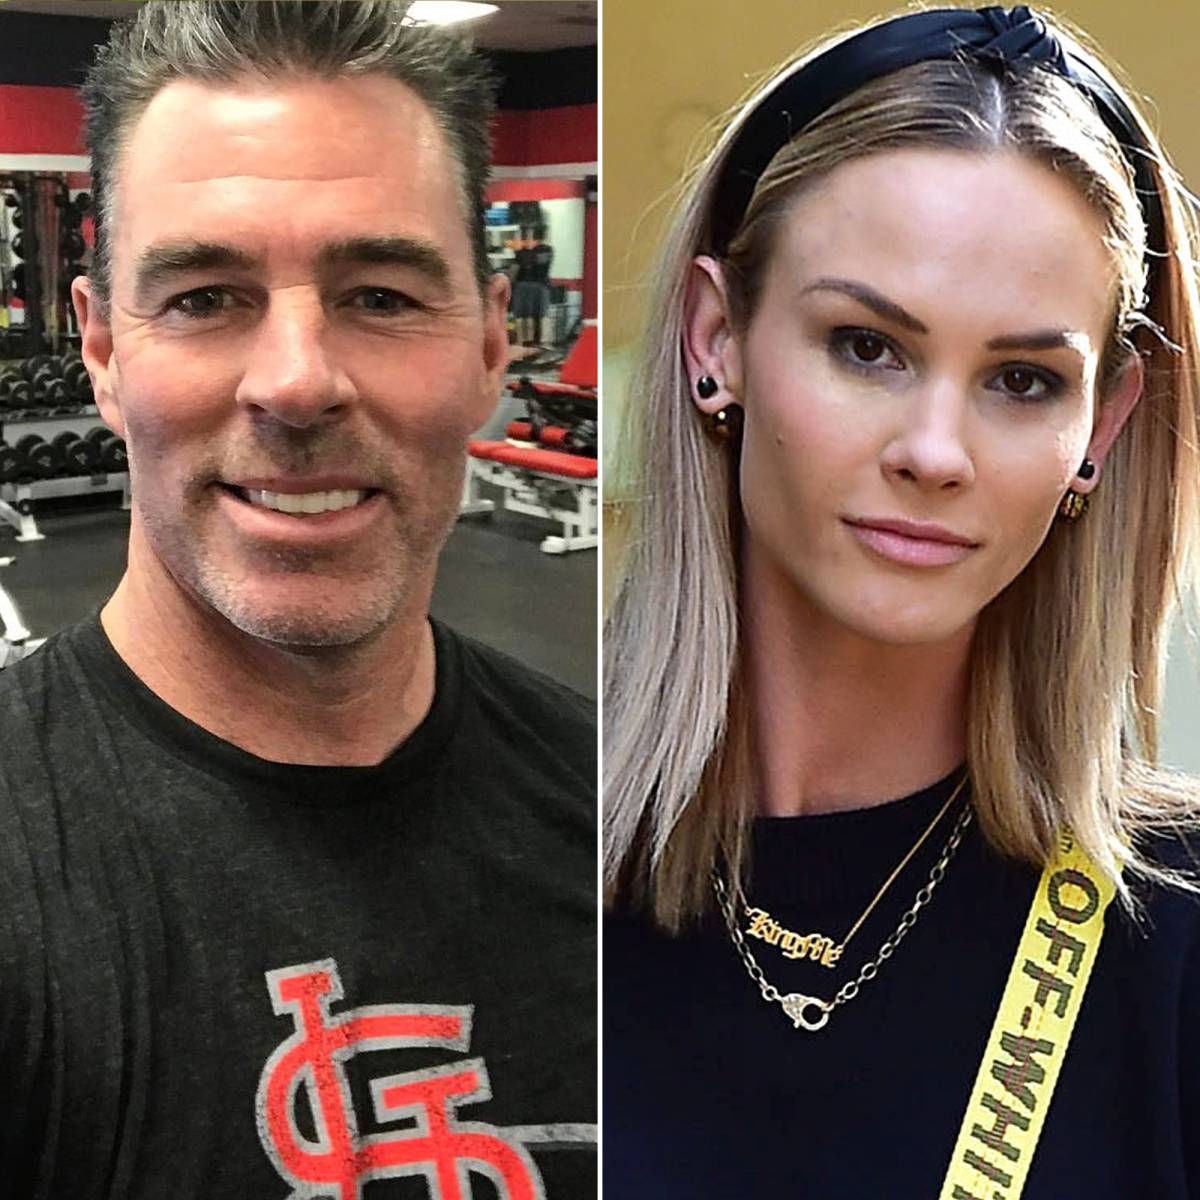 Jim Edmonds Returns to 'Dirty' House After Meghan King Moves Out